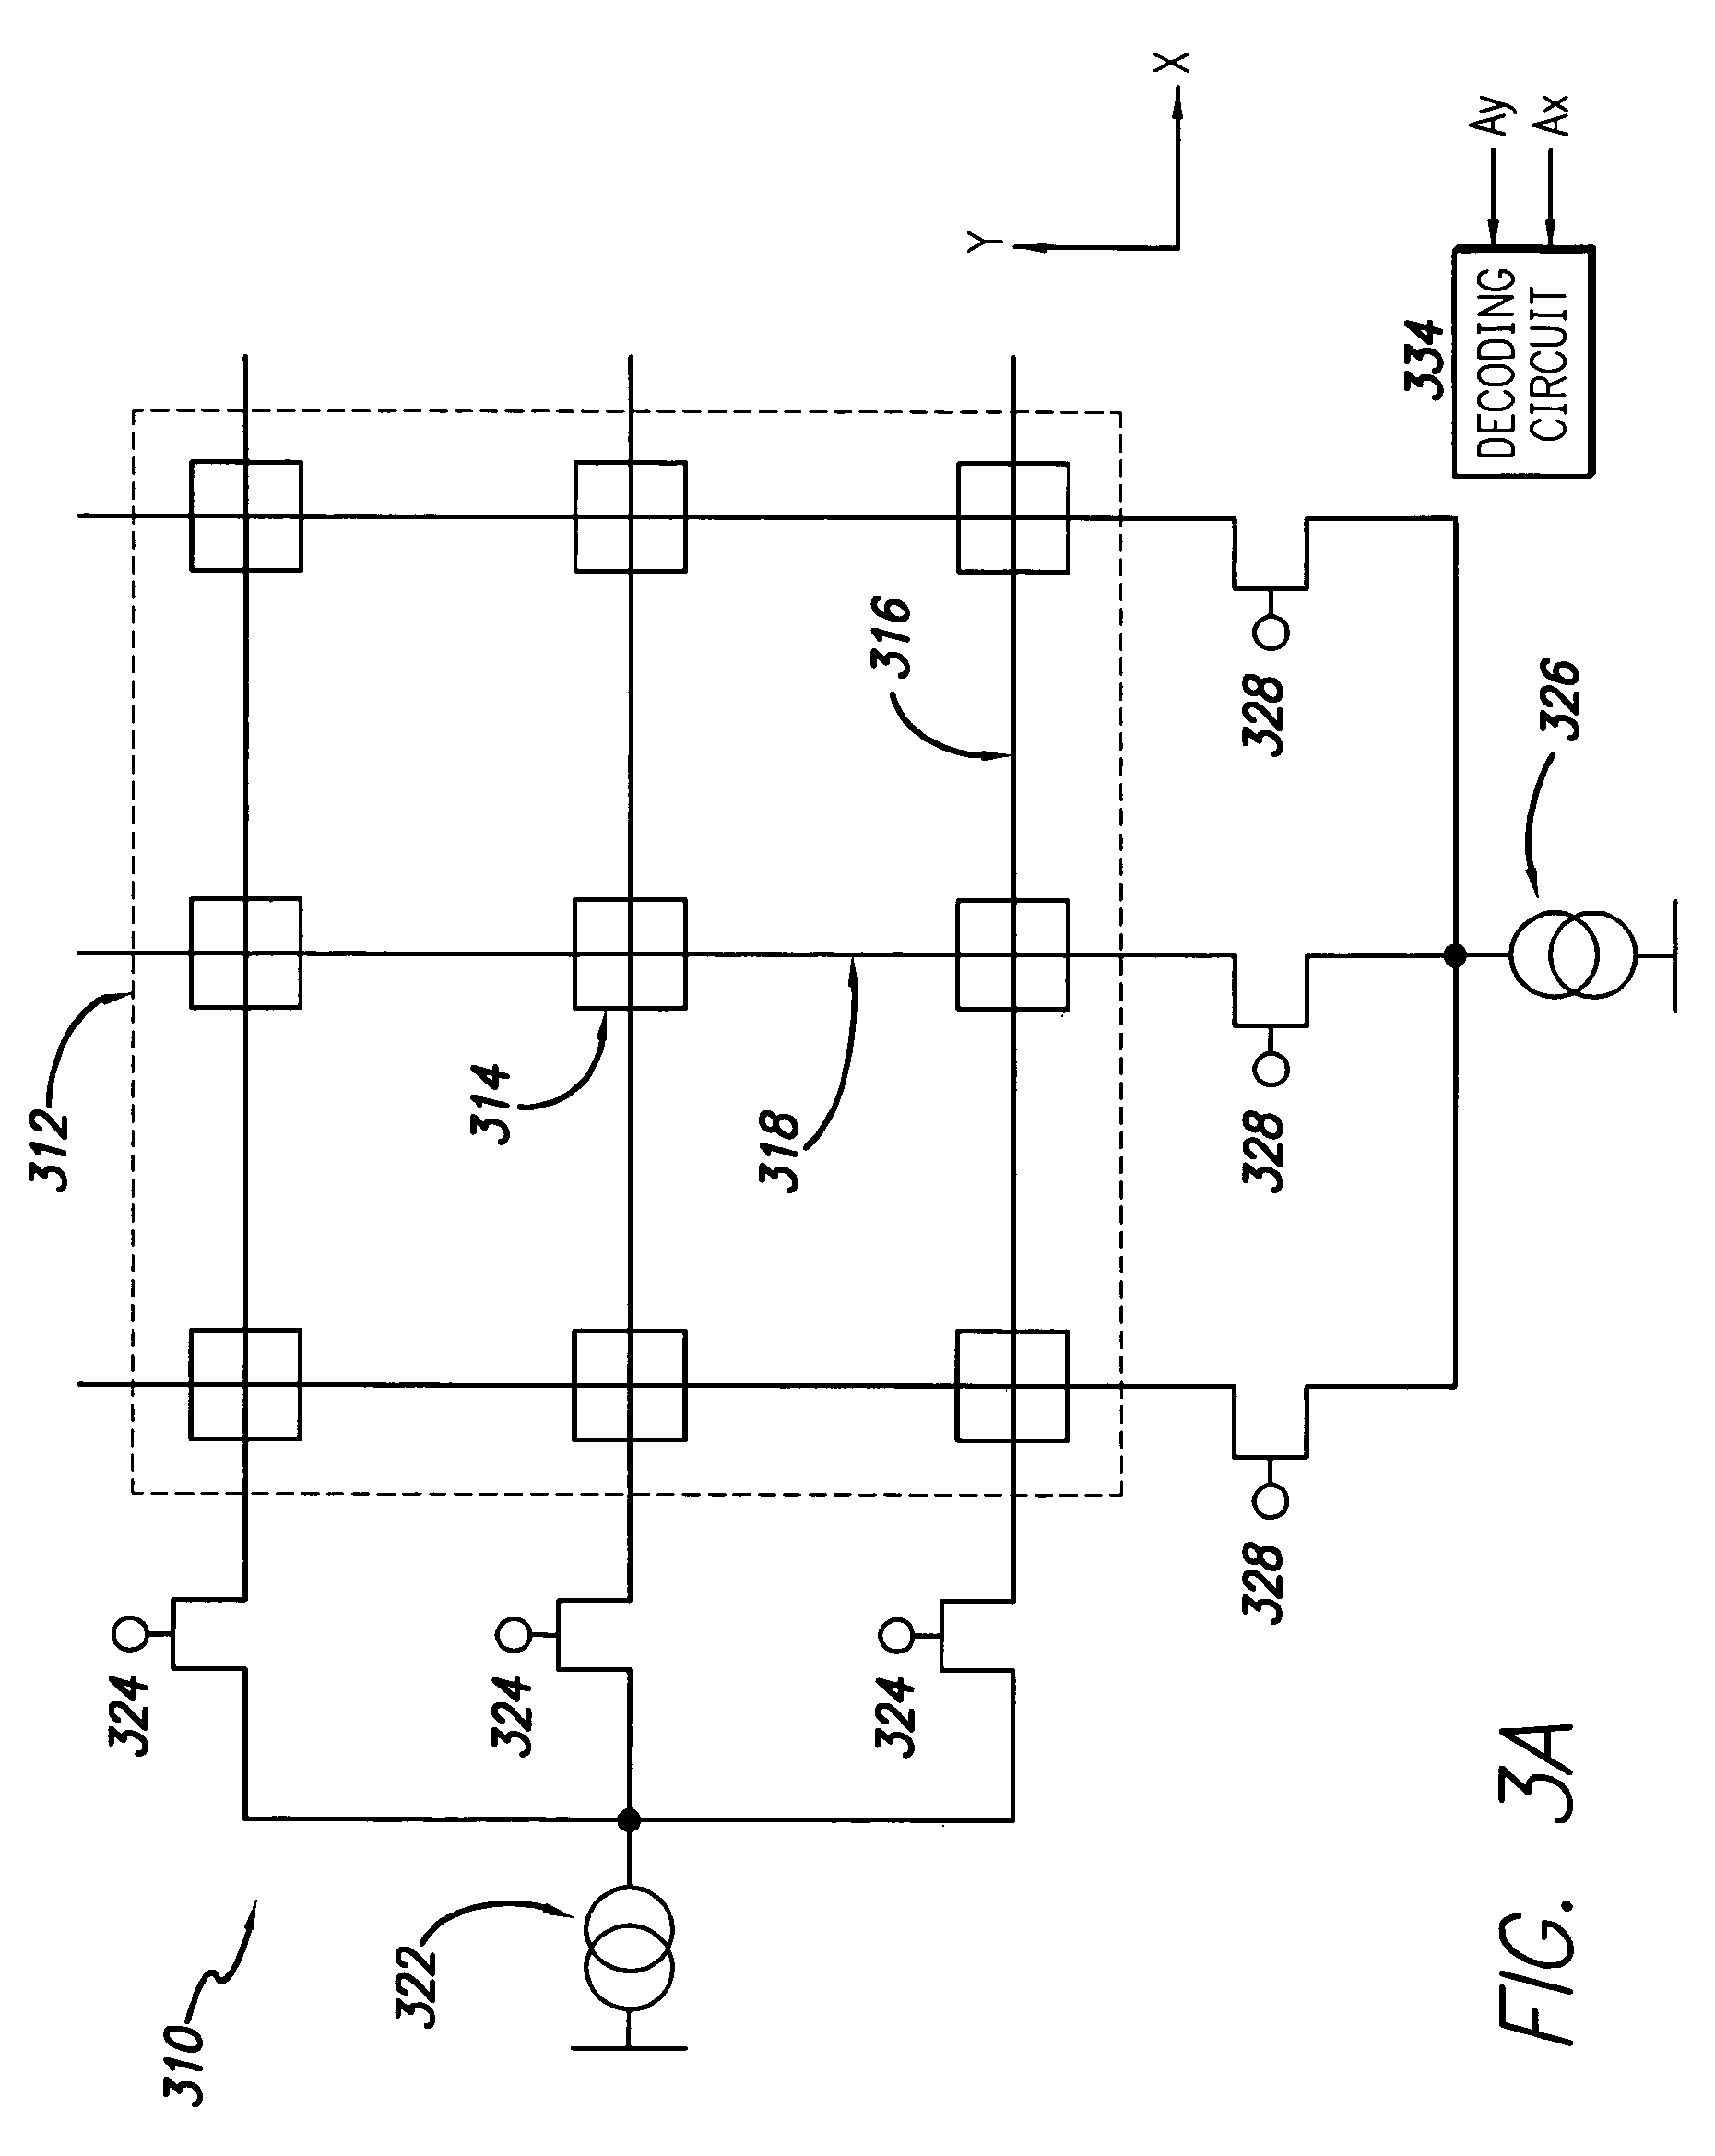 Series diode thermally assisted MRAM